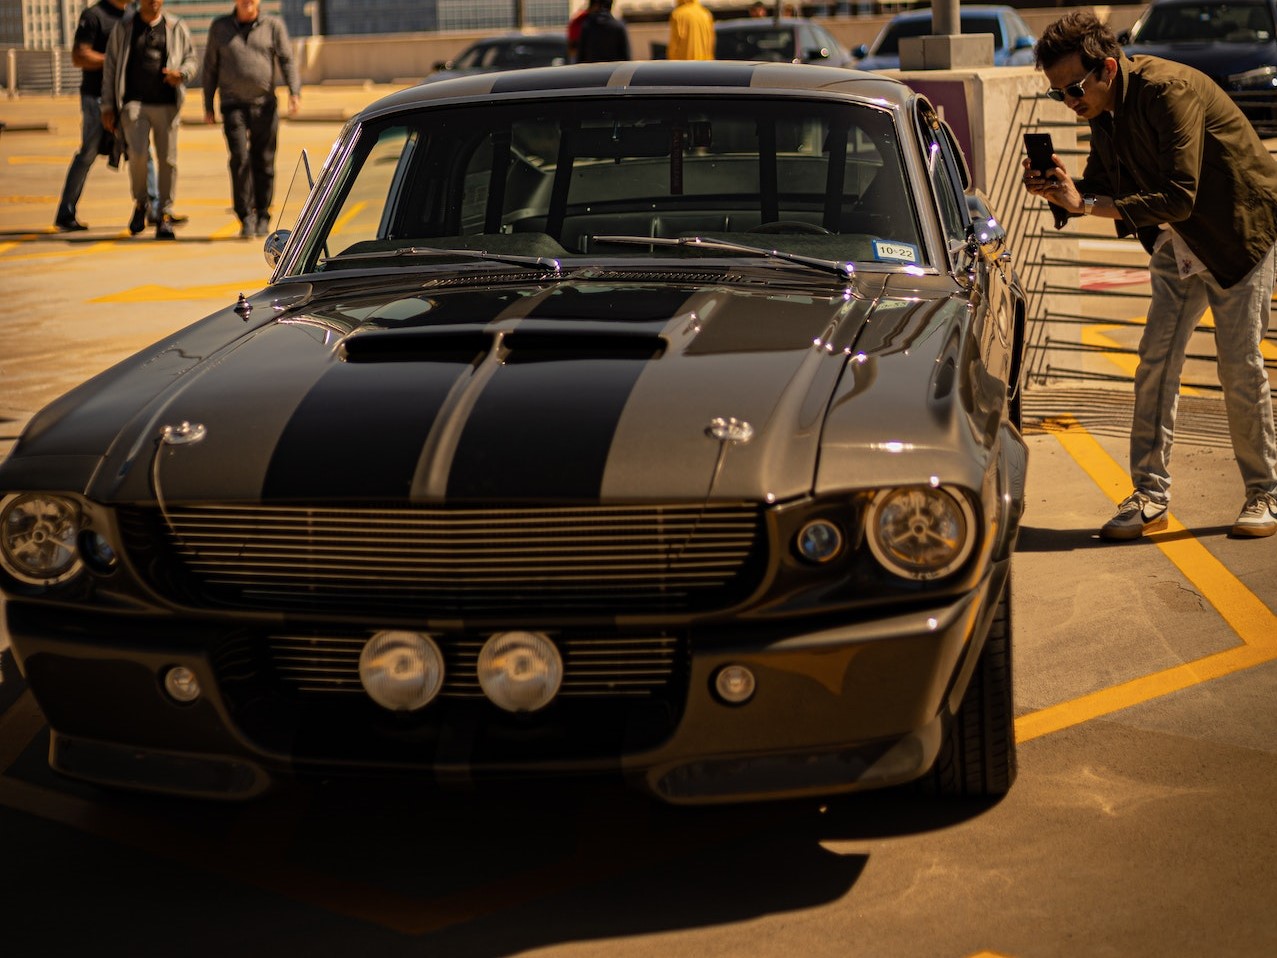 A Ford Mustang Shelby GT 500 on the Concrete Cark Park | Veteran Car Donations